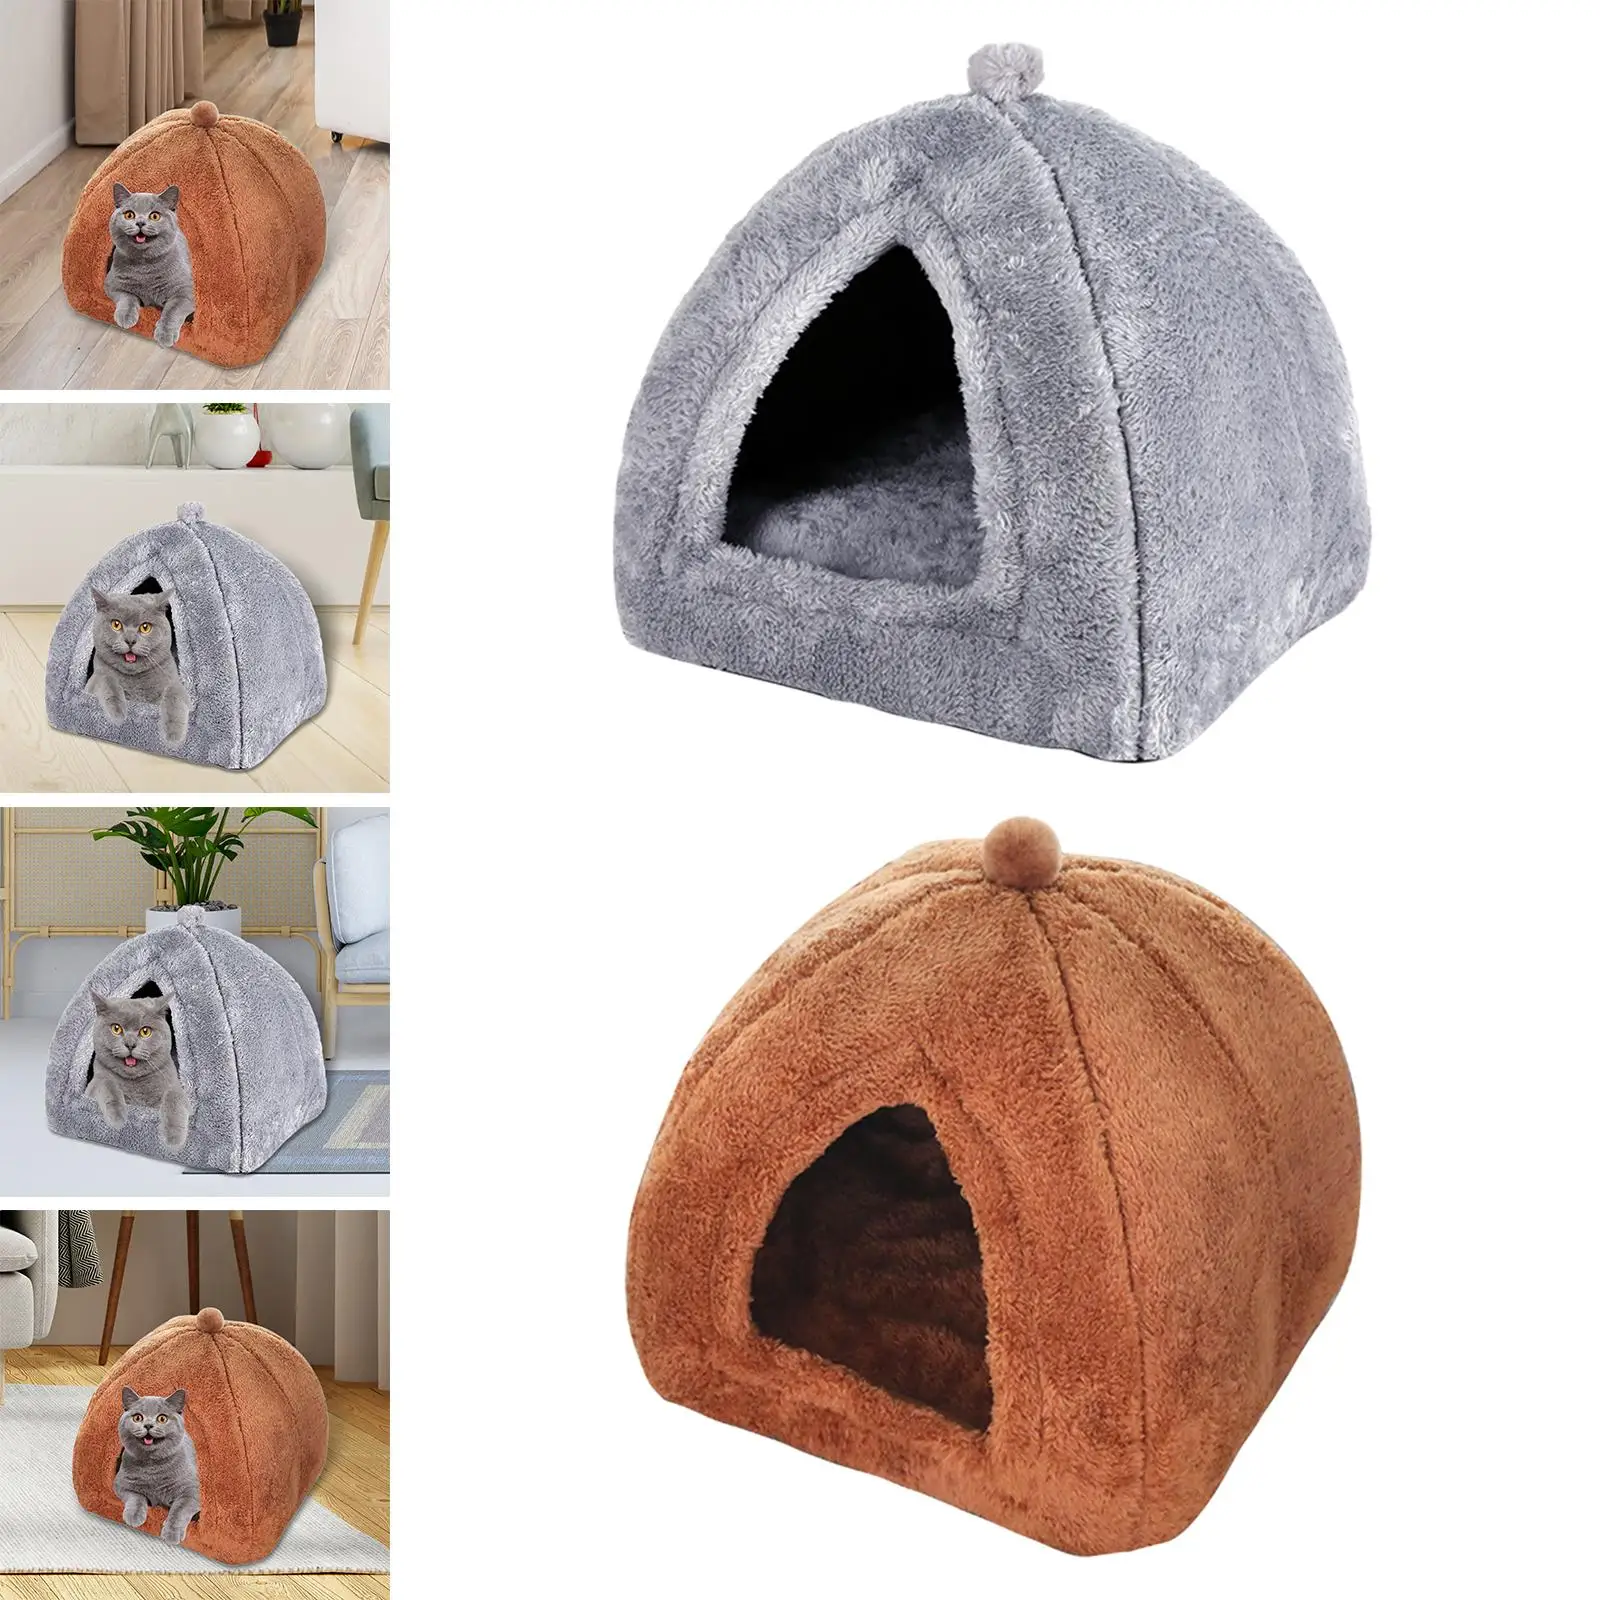 Plush cave Bed puppy Tent Semi Enclosed Comfortable for Small Animals